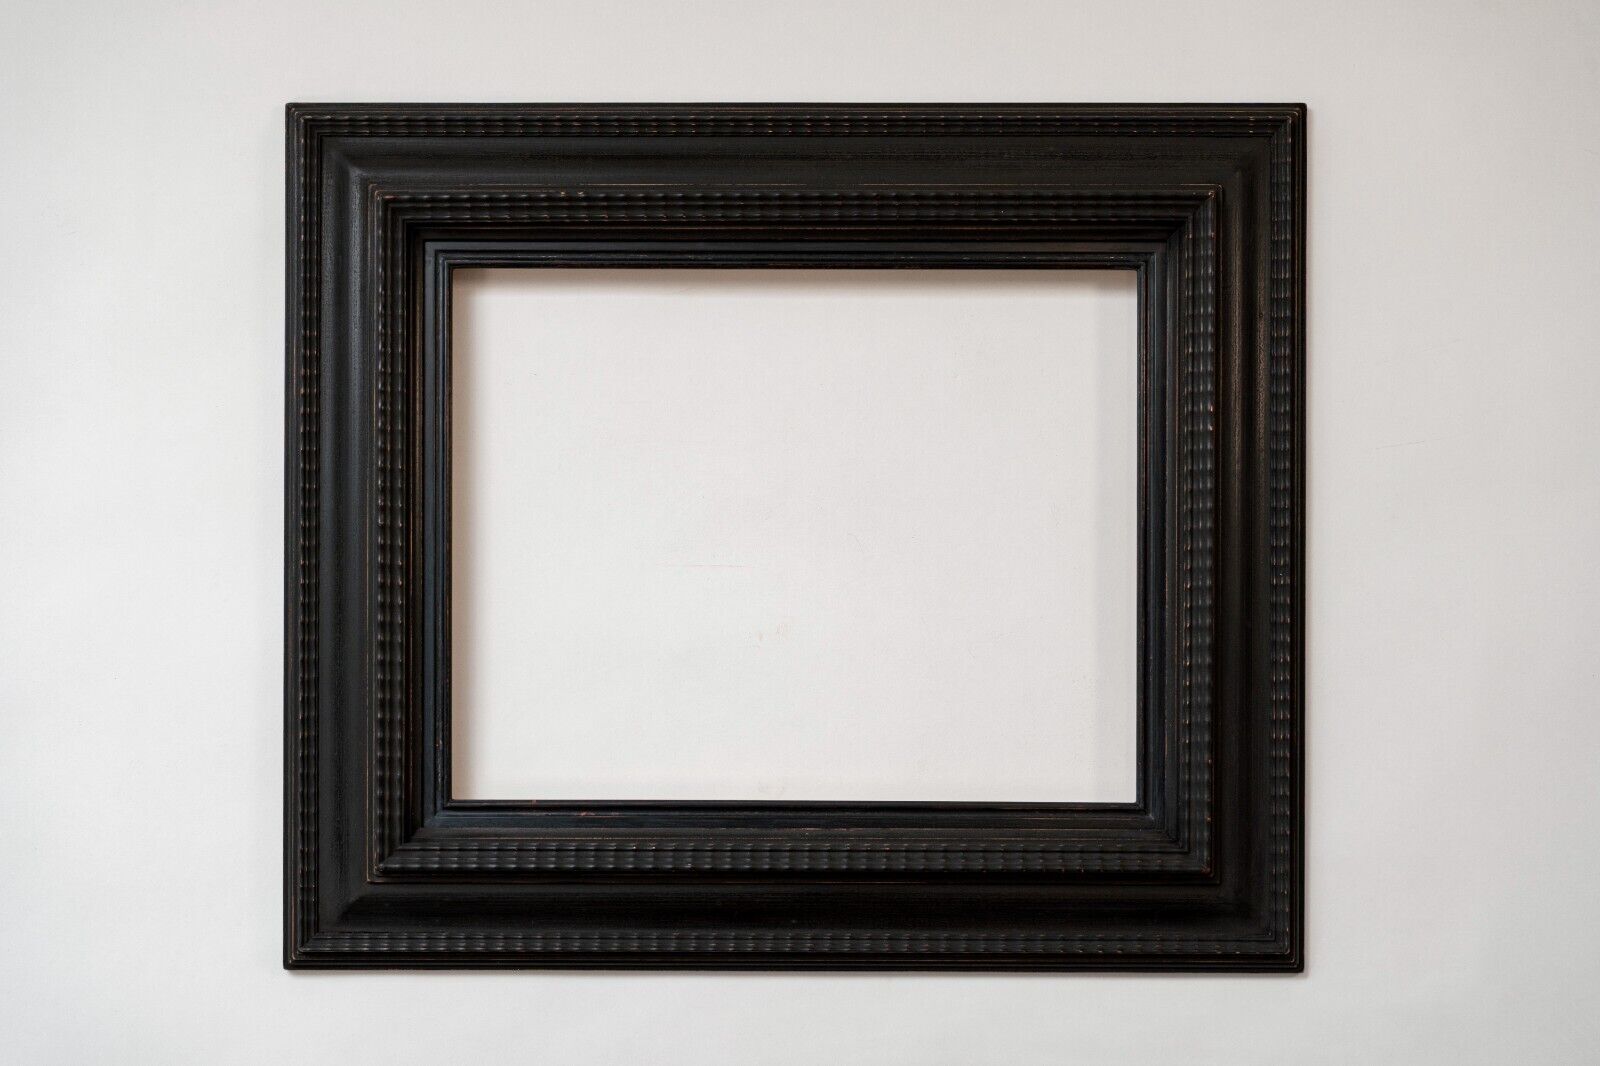 17th century Dutch style ripple molding replica picture frame